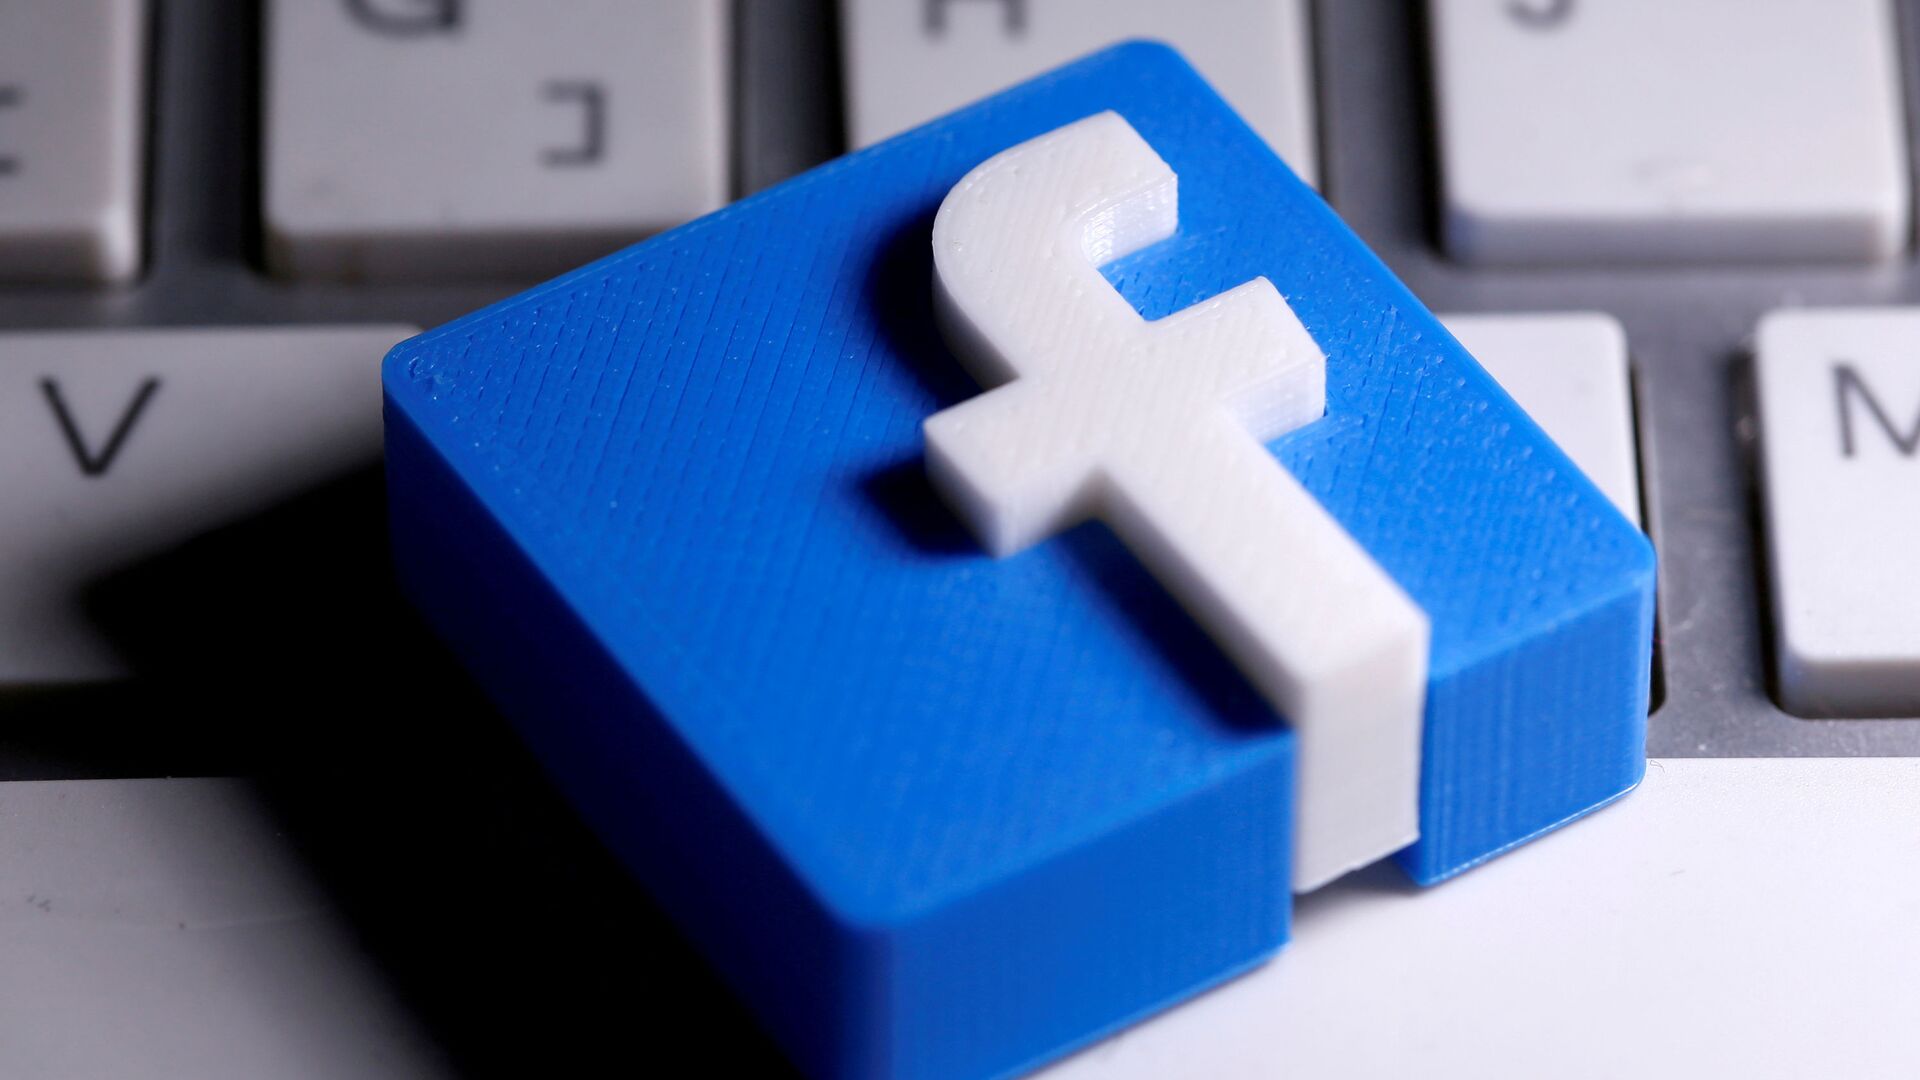 A 3D-printed Facebook logo is seen placed on a keyboard in this illustration taken March 25, 2020.  - Sputnik International, 1920, 22.02.2021